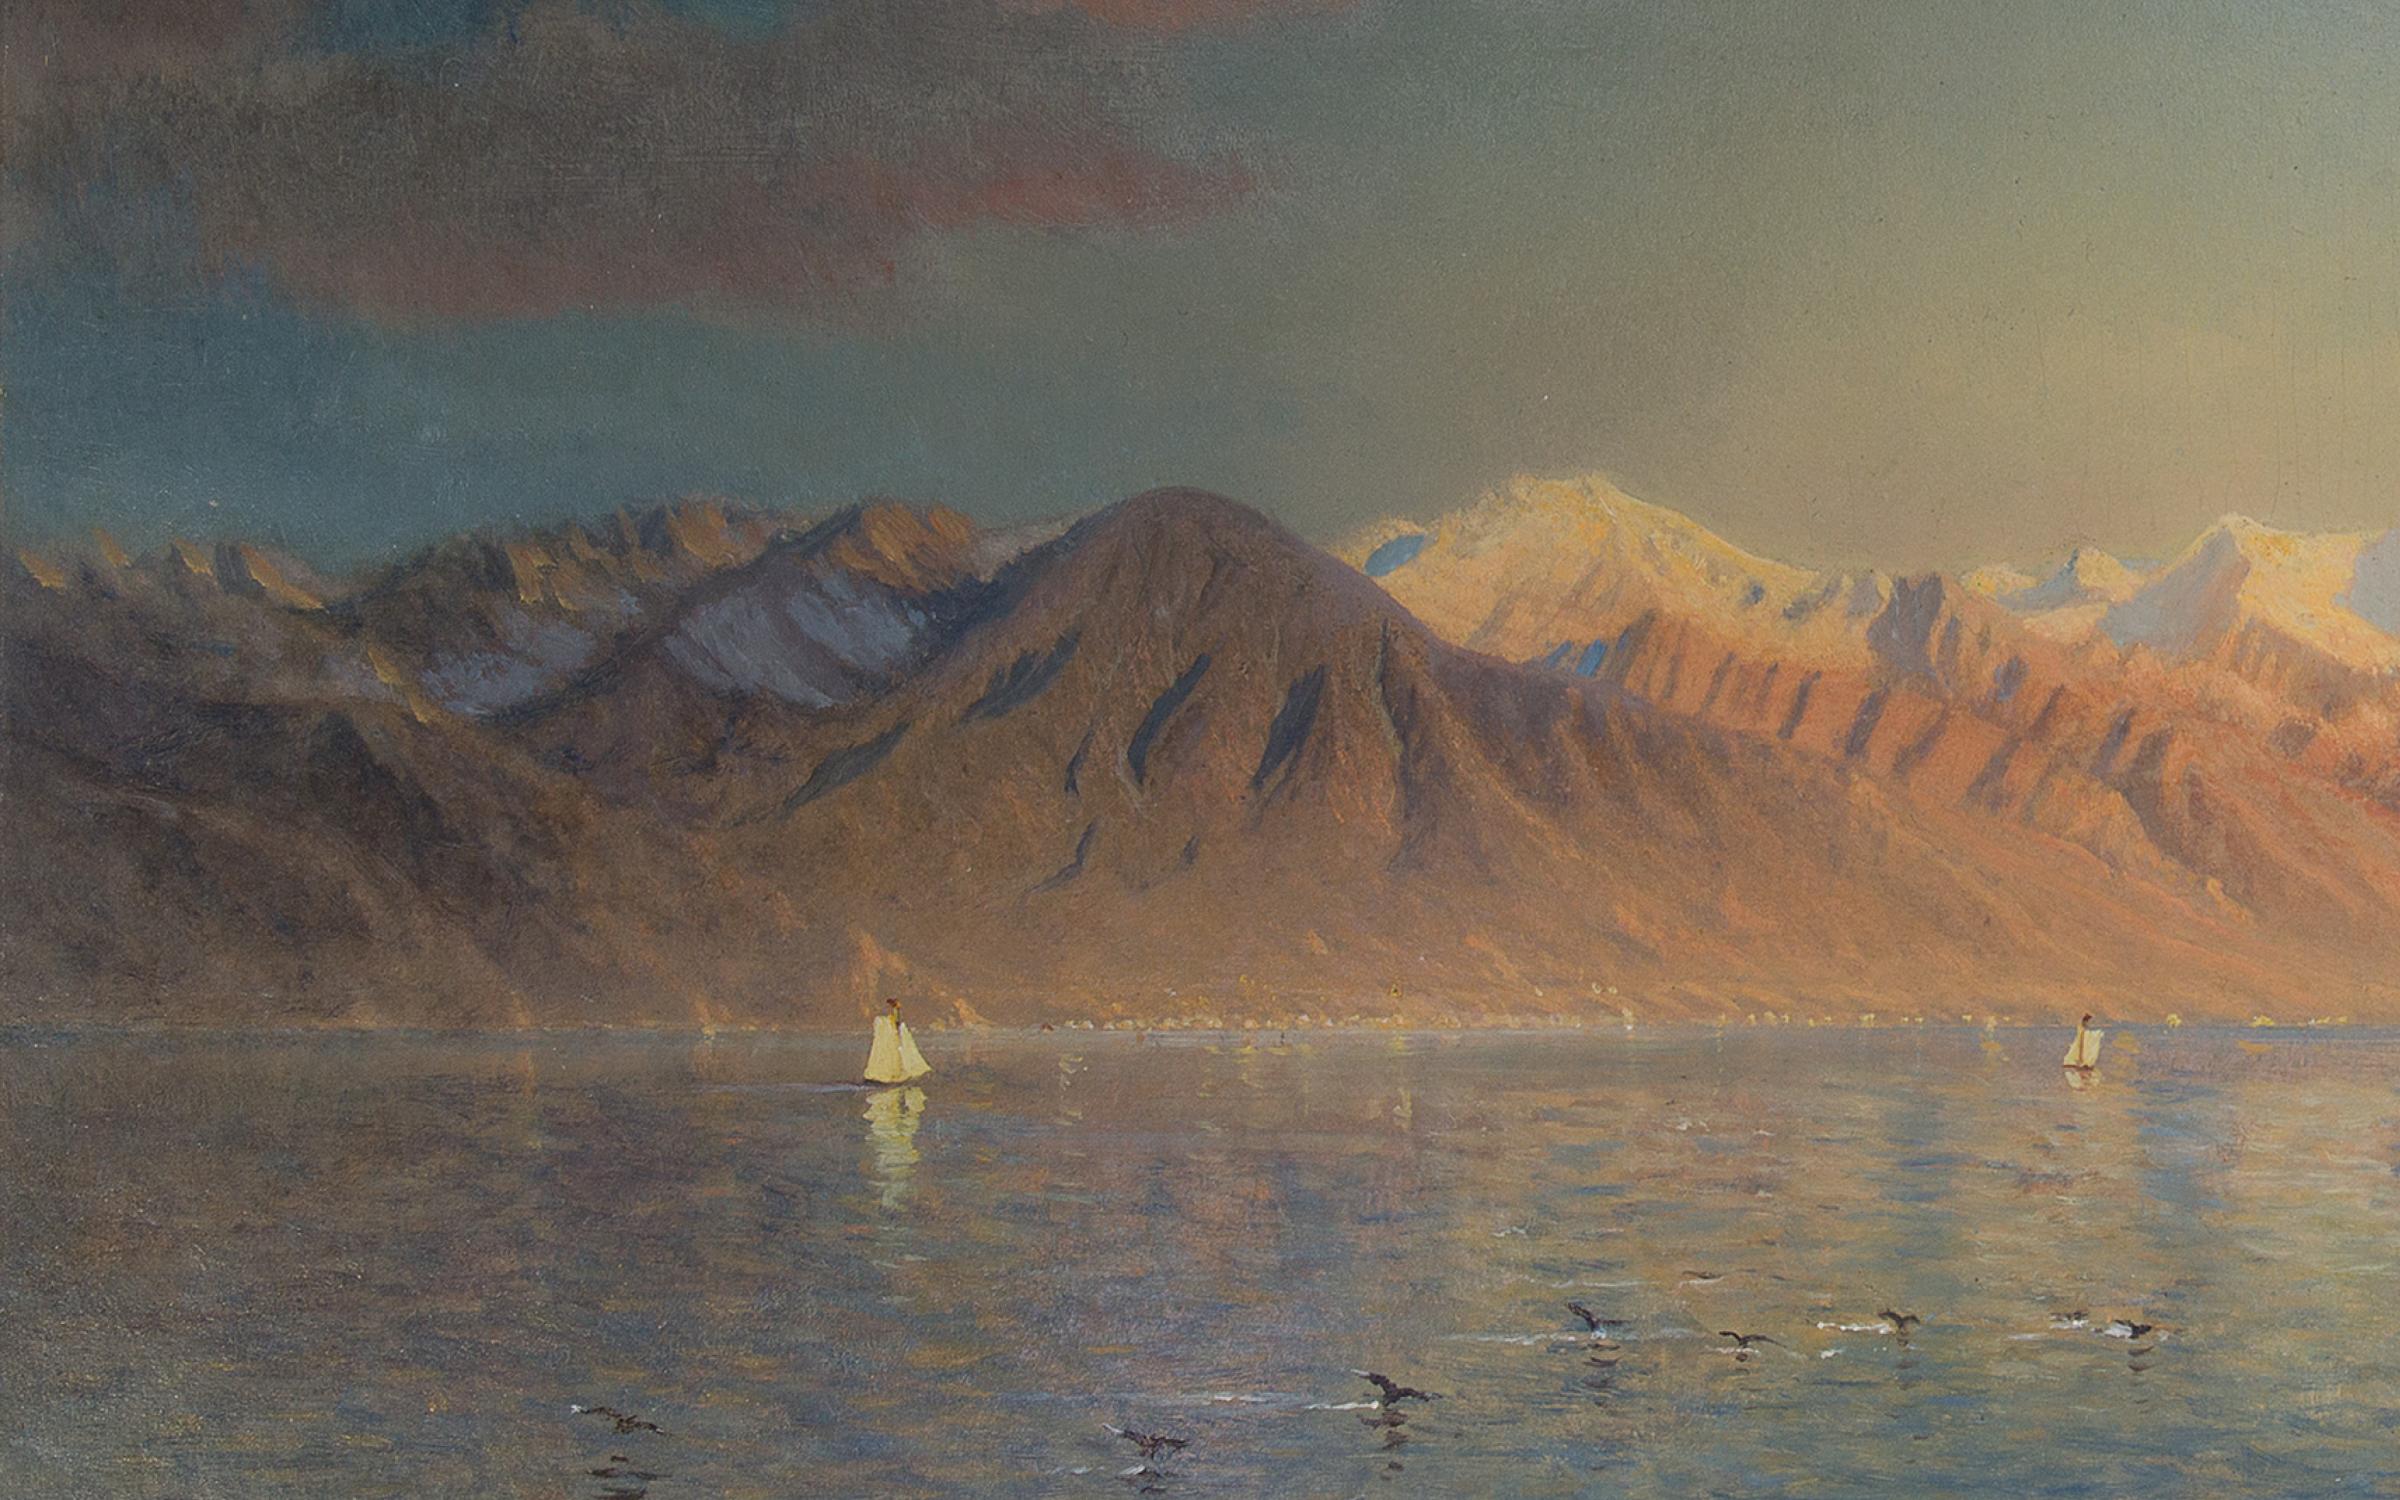 A painting of brown snow capped mountains with a blue lake and flying birds.